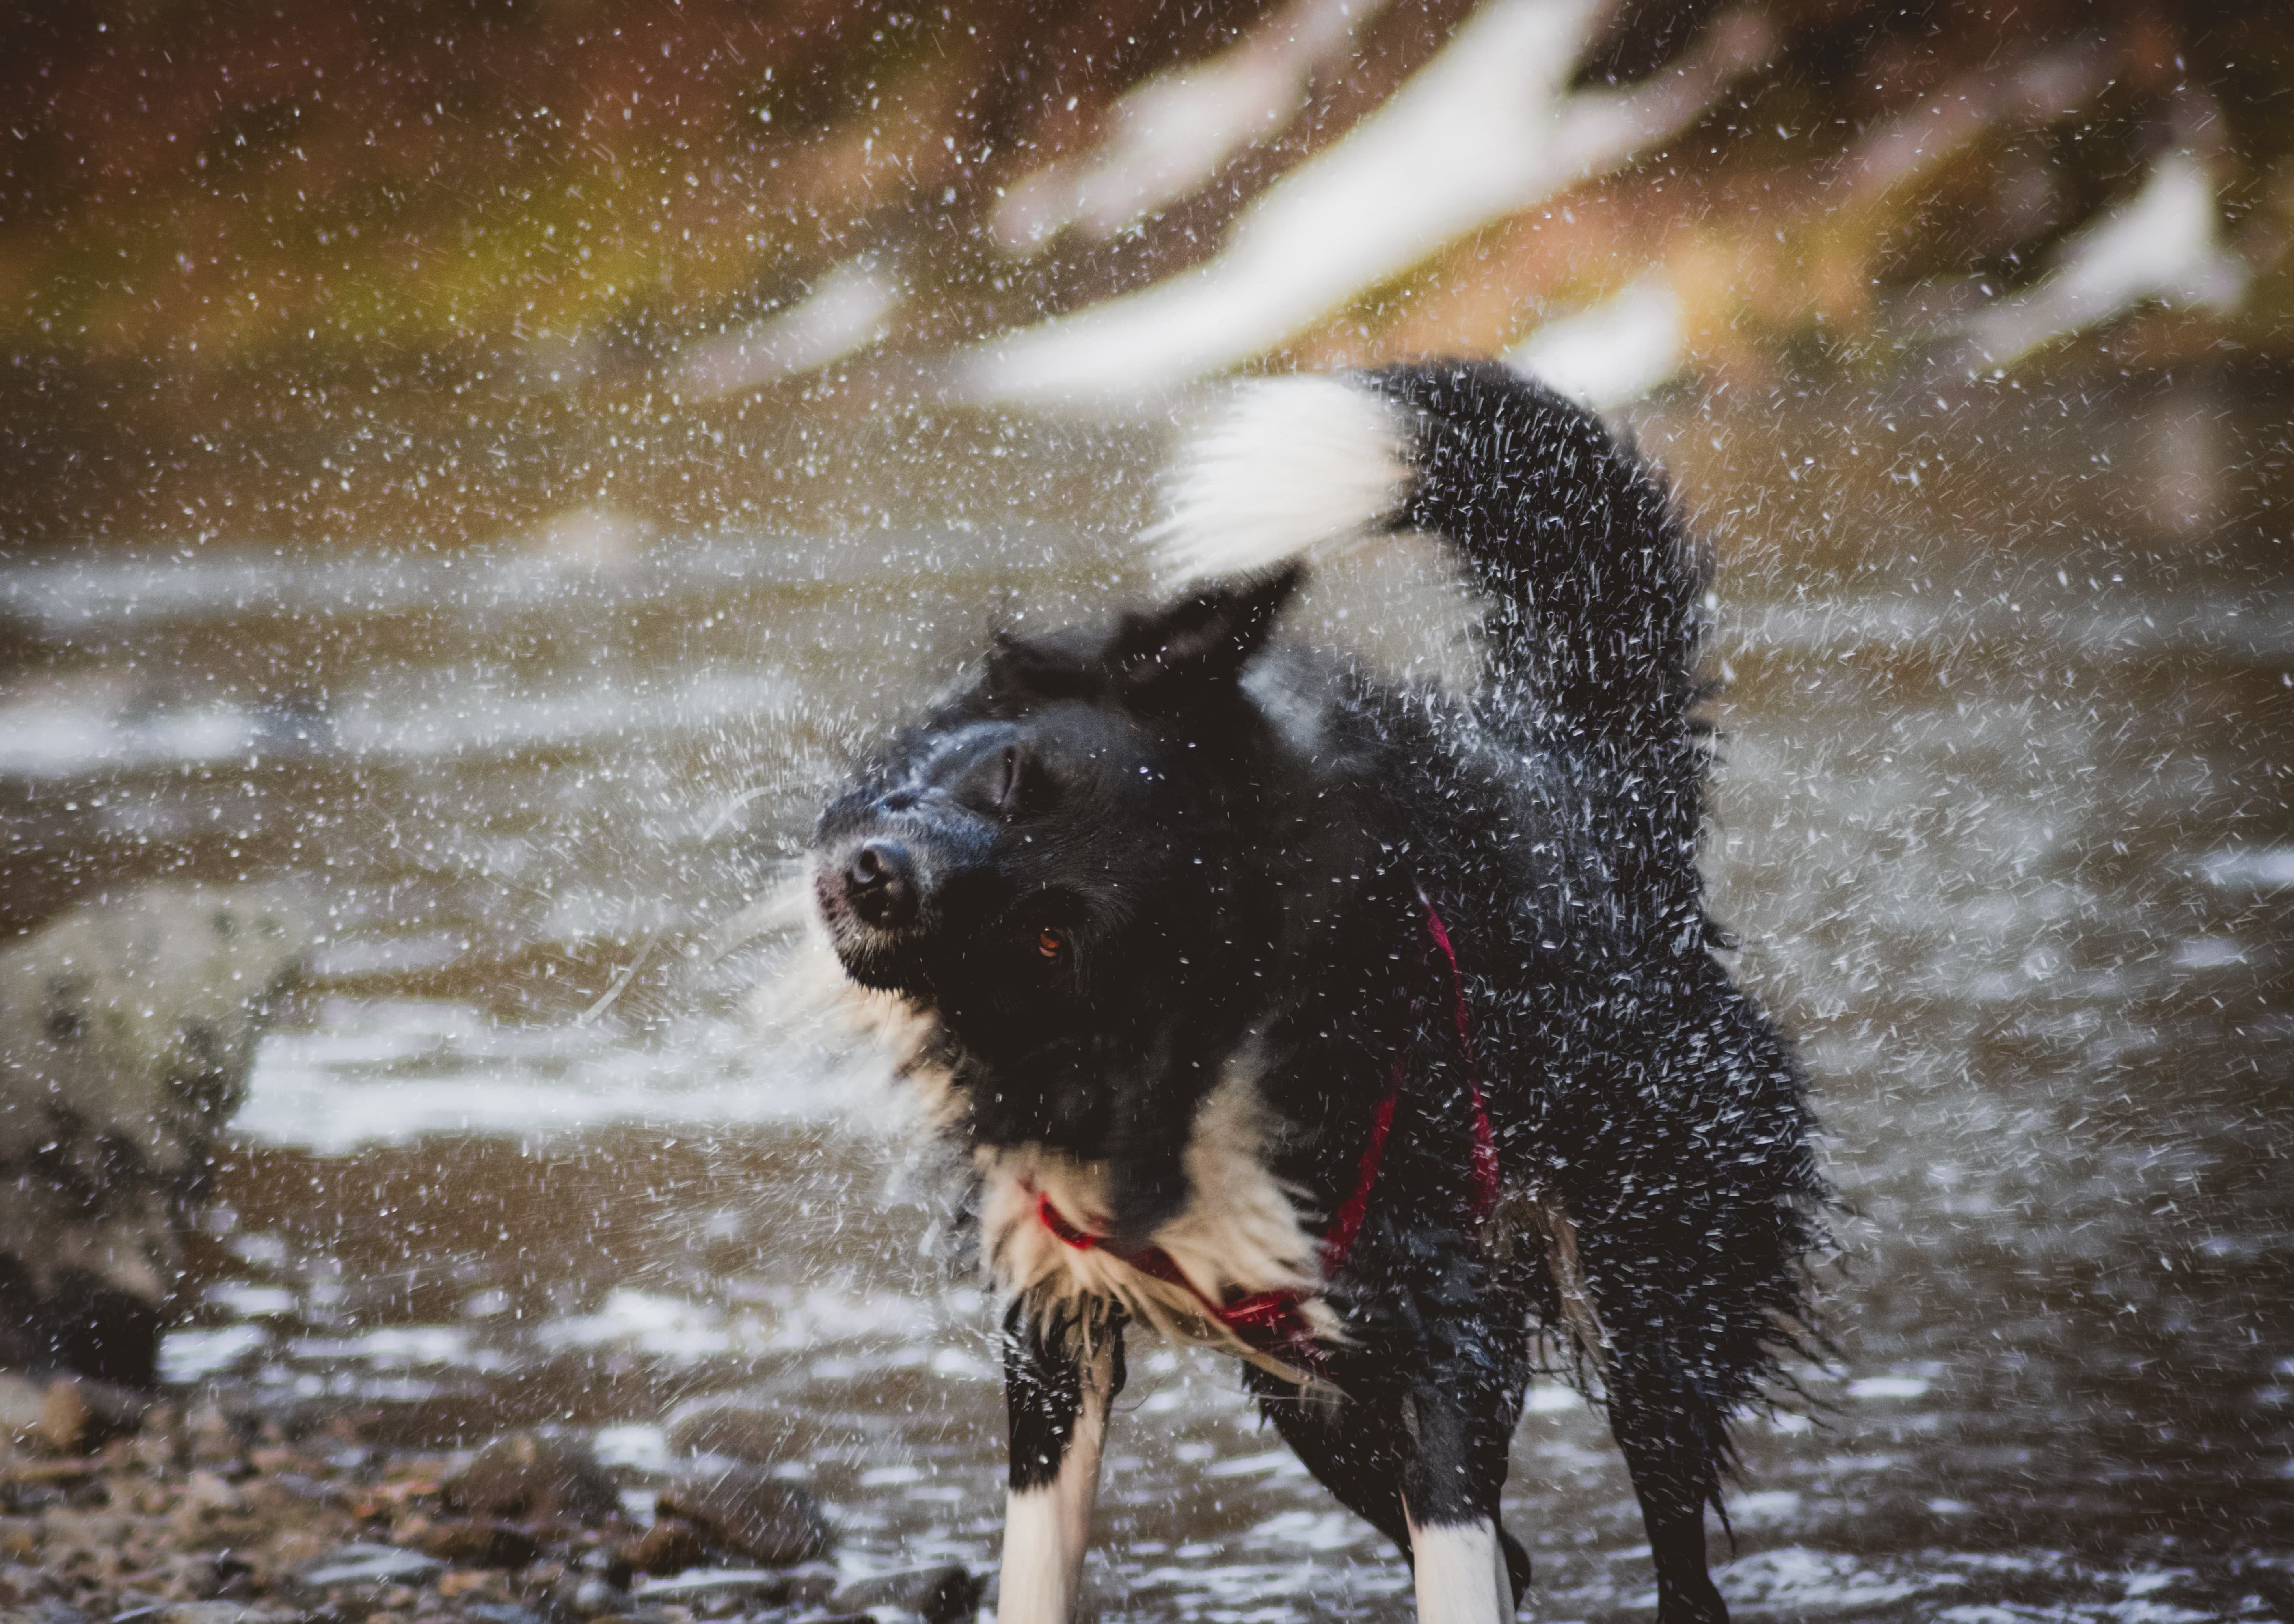 Image of a dog shaking water off it depicting why we don't do pet photoshoots in rain